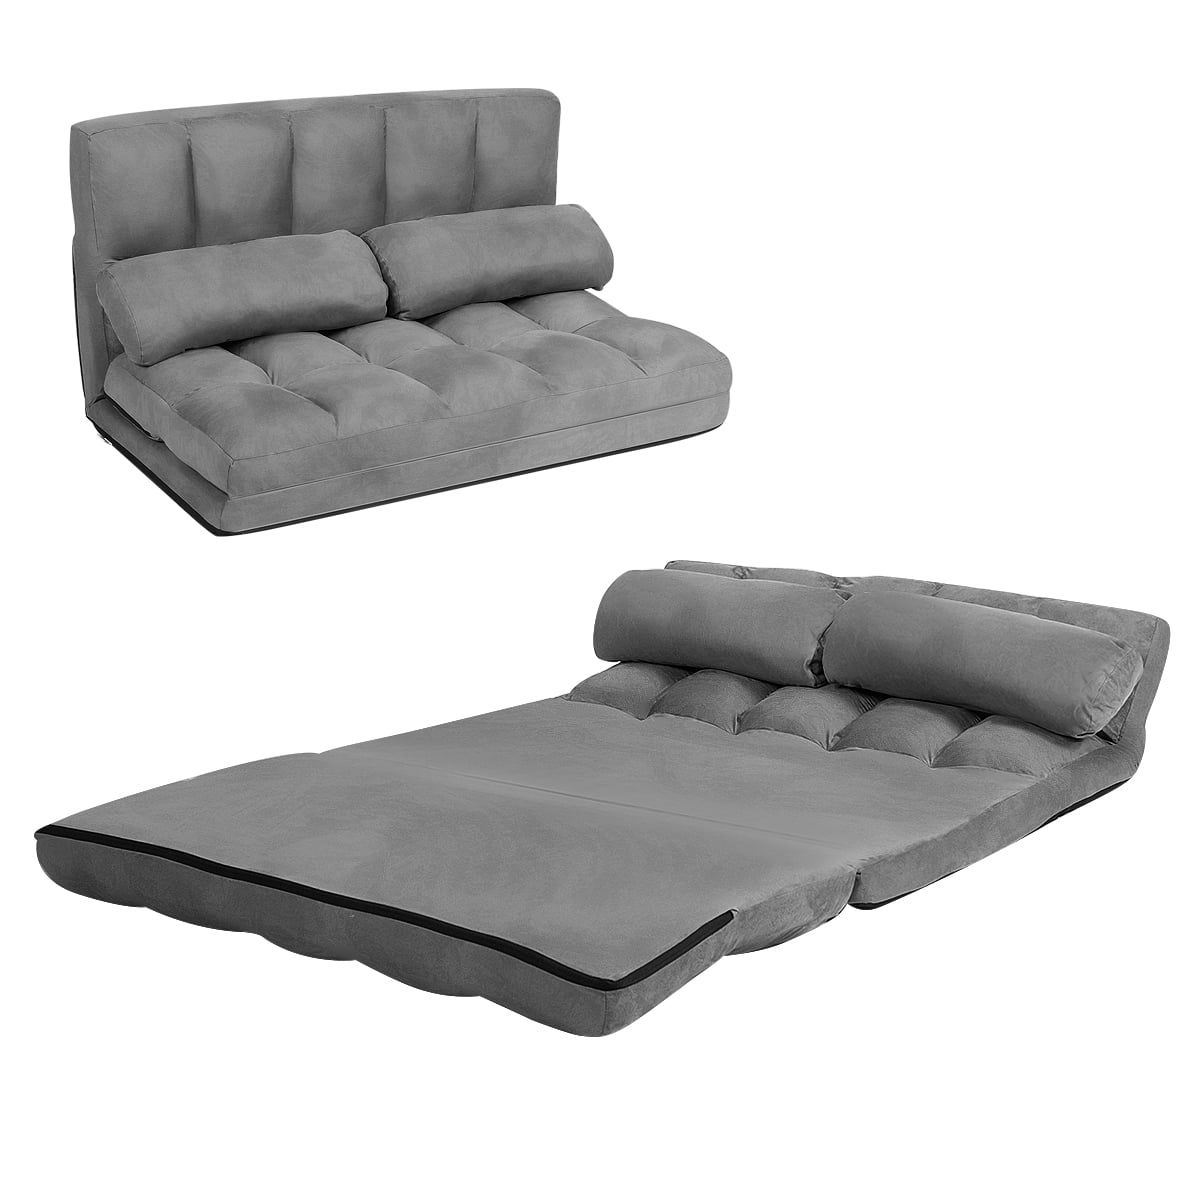 Topbuy Adjustable Floor Sofa Foldable Lazy Sofa Bed With 2 Pillows Grey Intended For 2 In 1 Foldable Sofas (View 11 of 20)